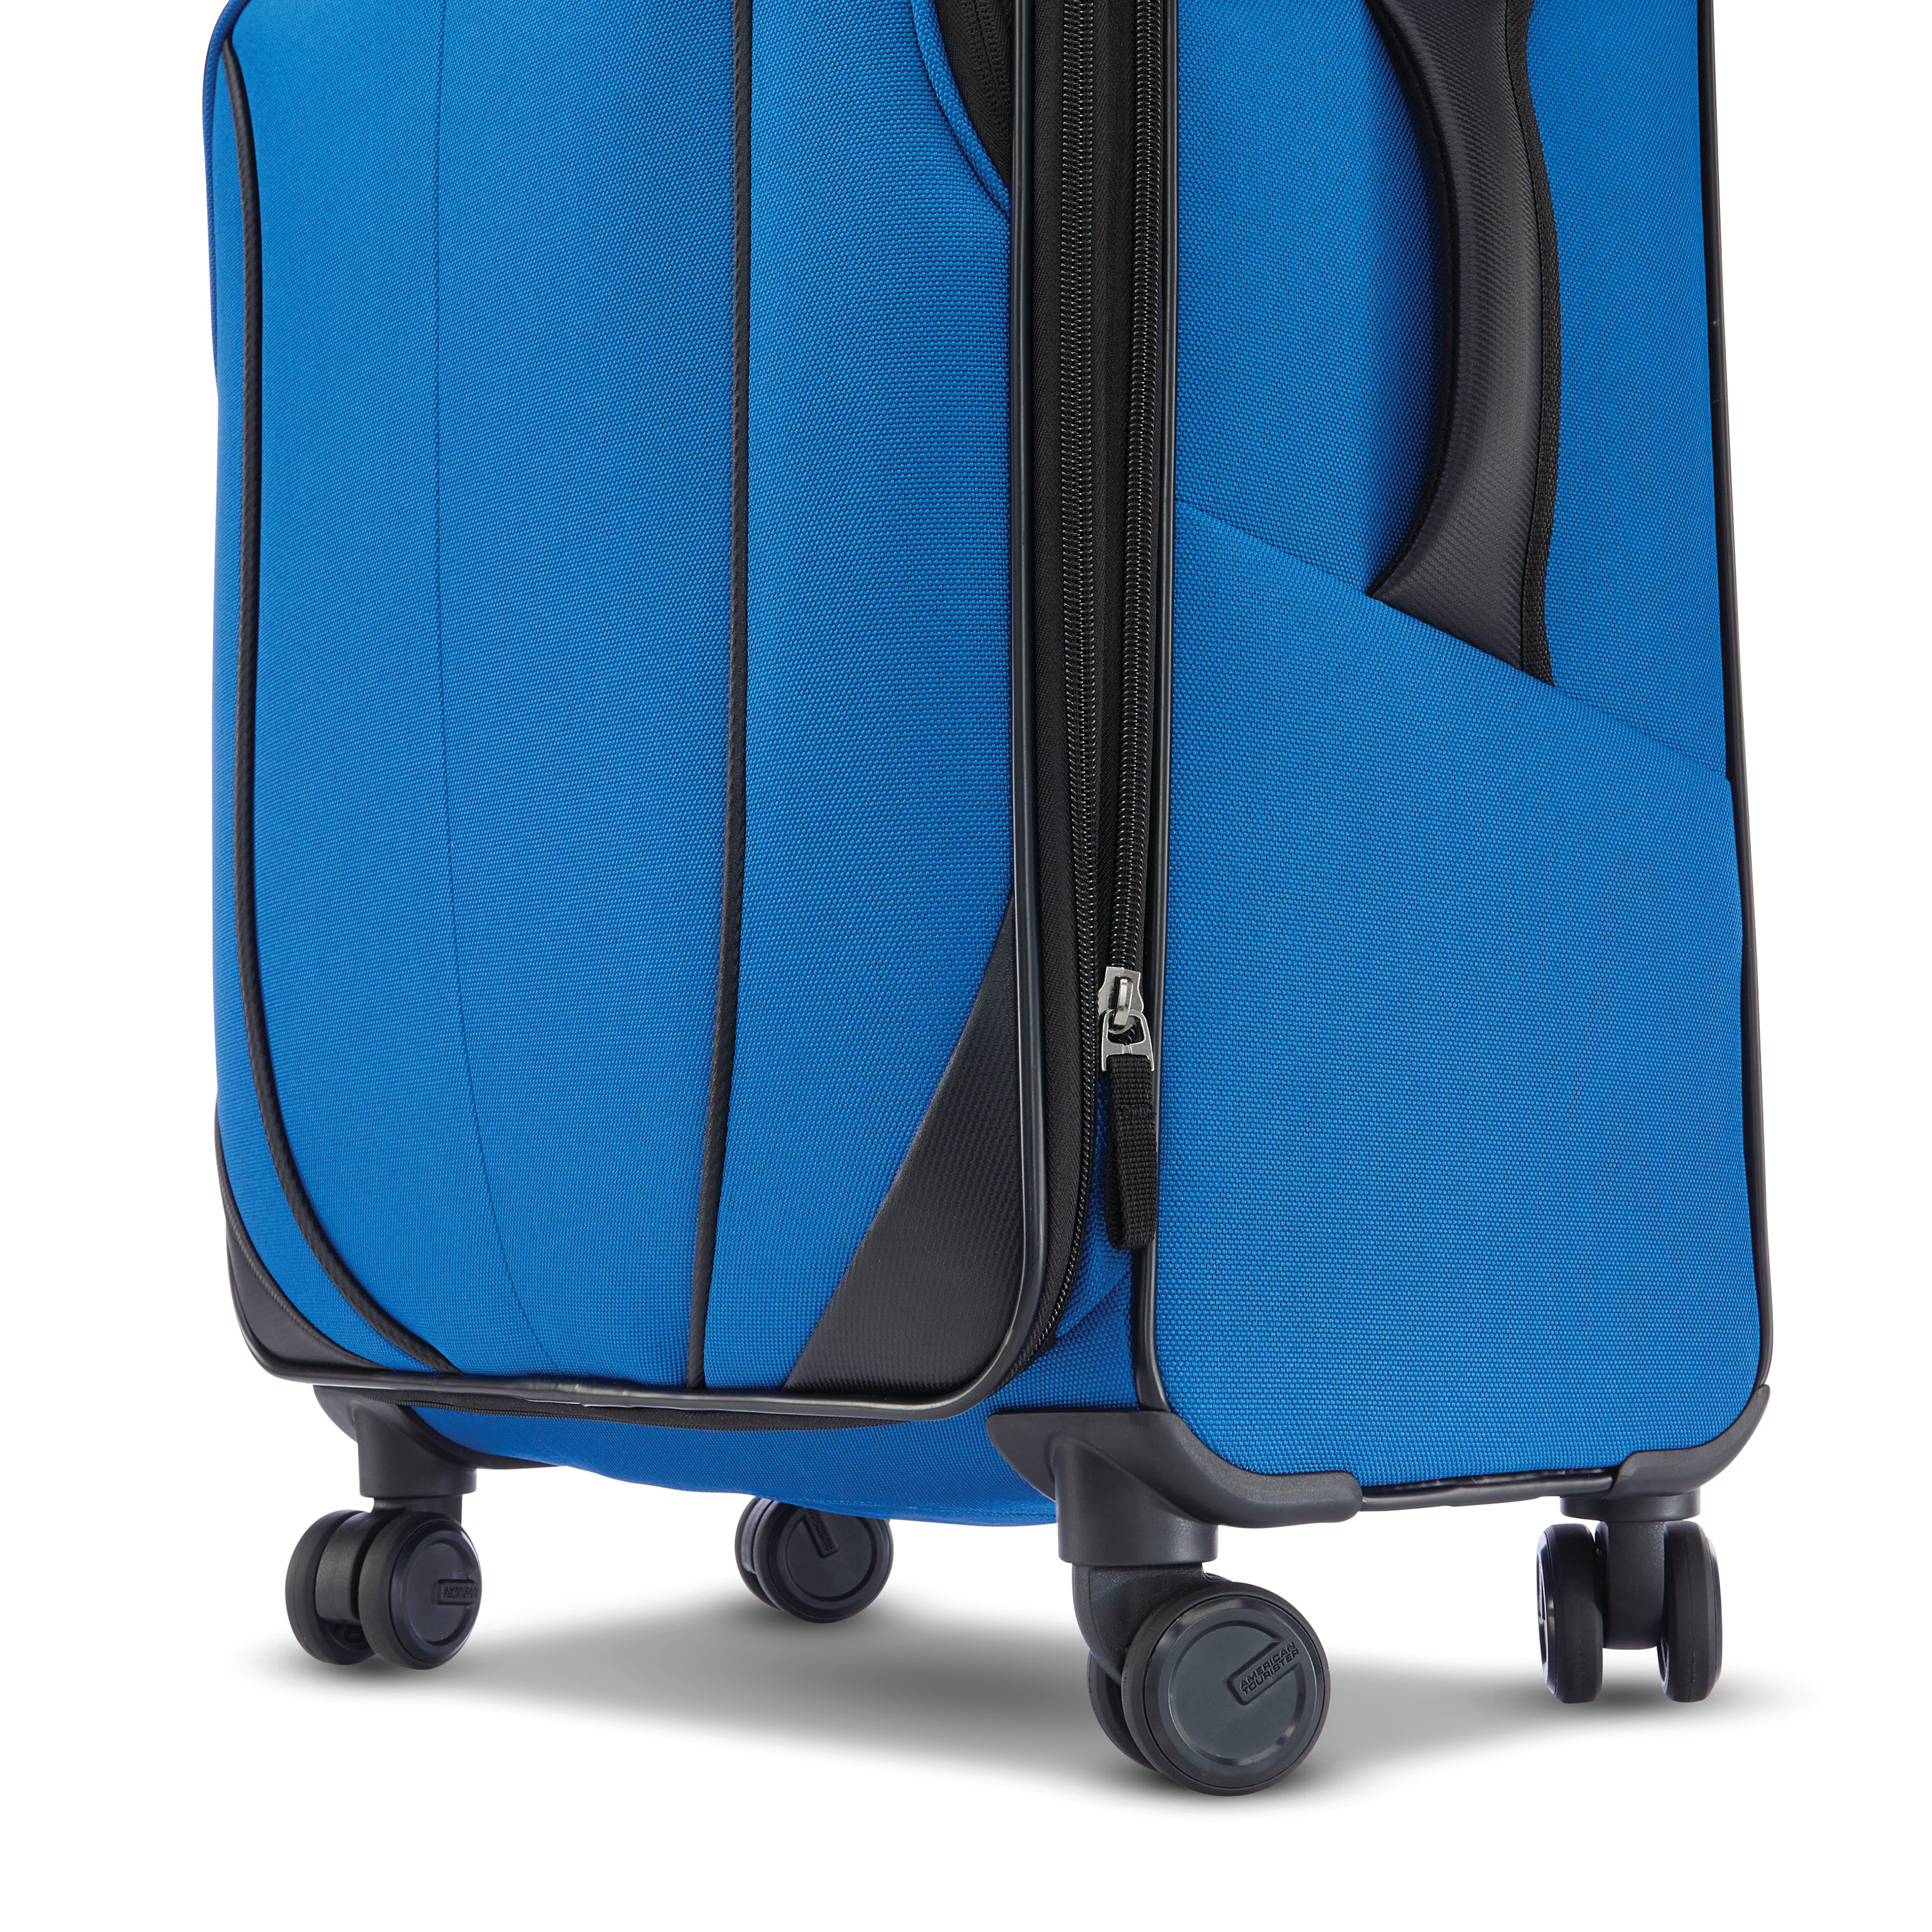 American Tourister 4 KIX 2.0 28" Upright Spinner Luggage - image 4 of 8